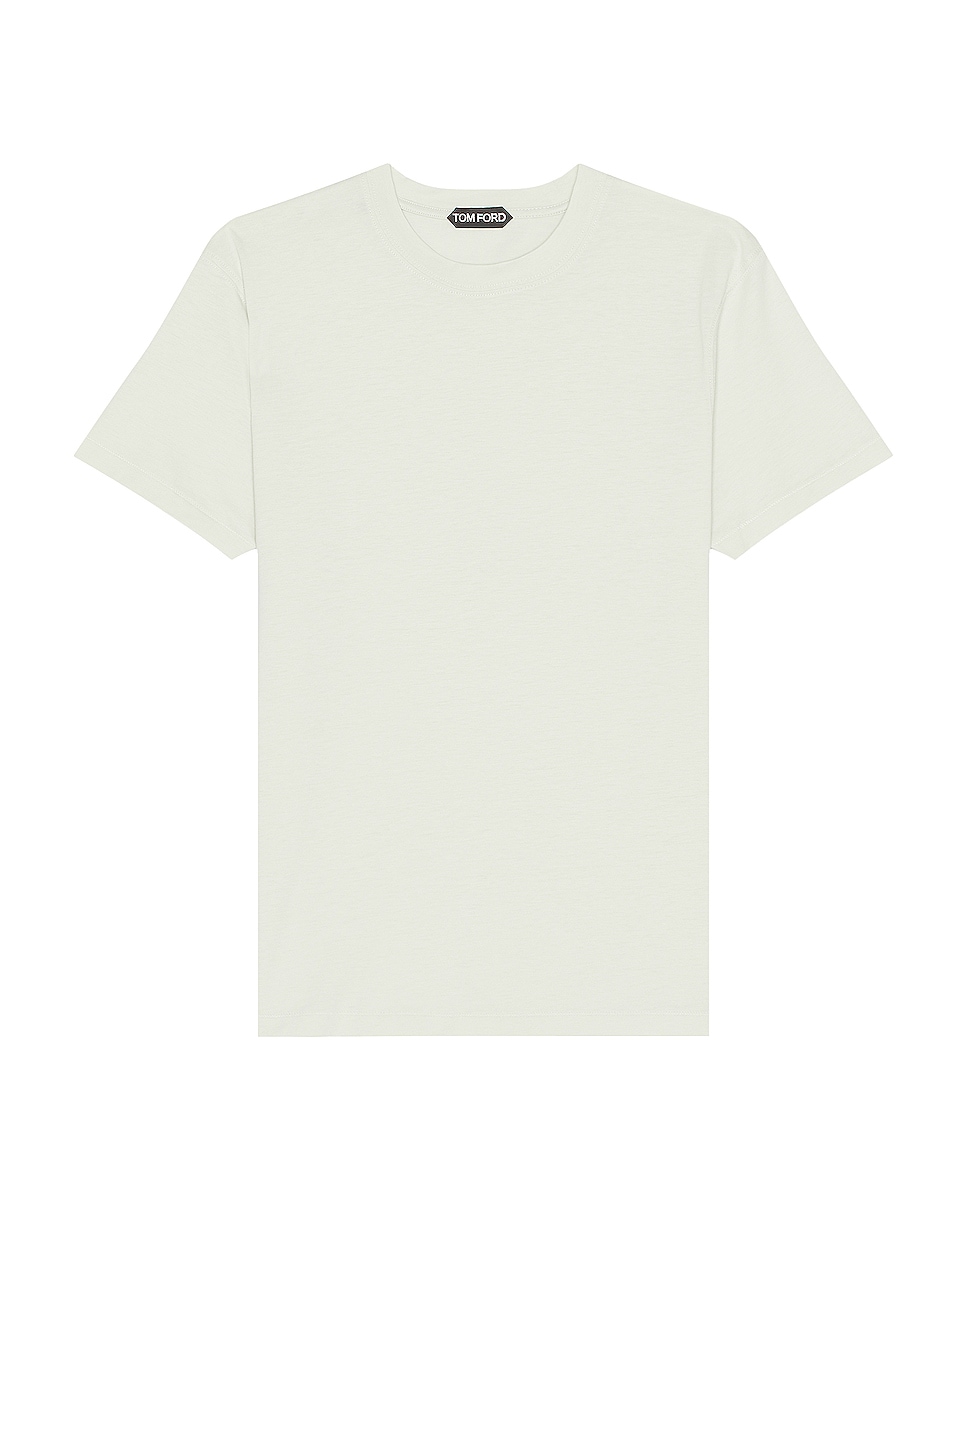 Image 1 of TOM FORD Lyocell Cotton Tee in Pale Mint